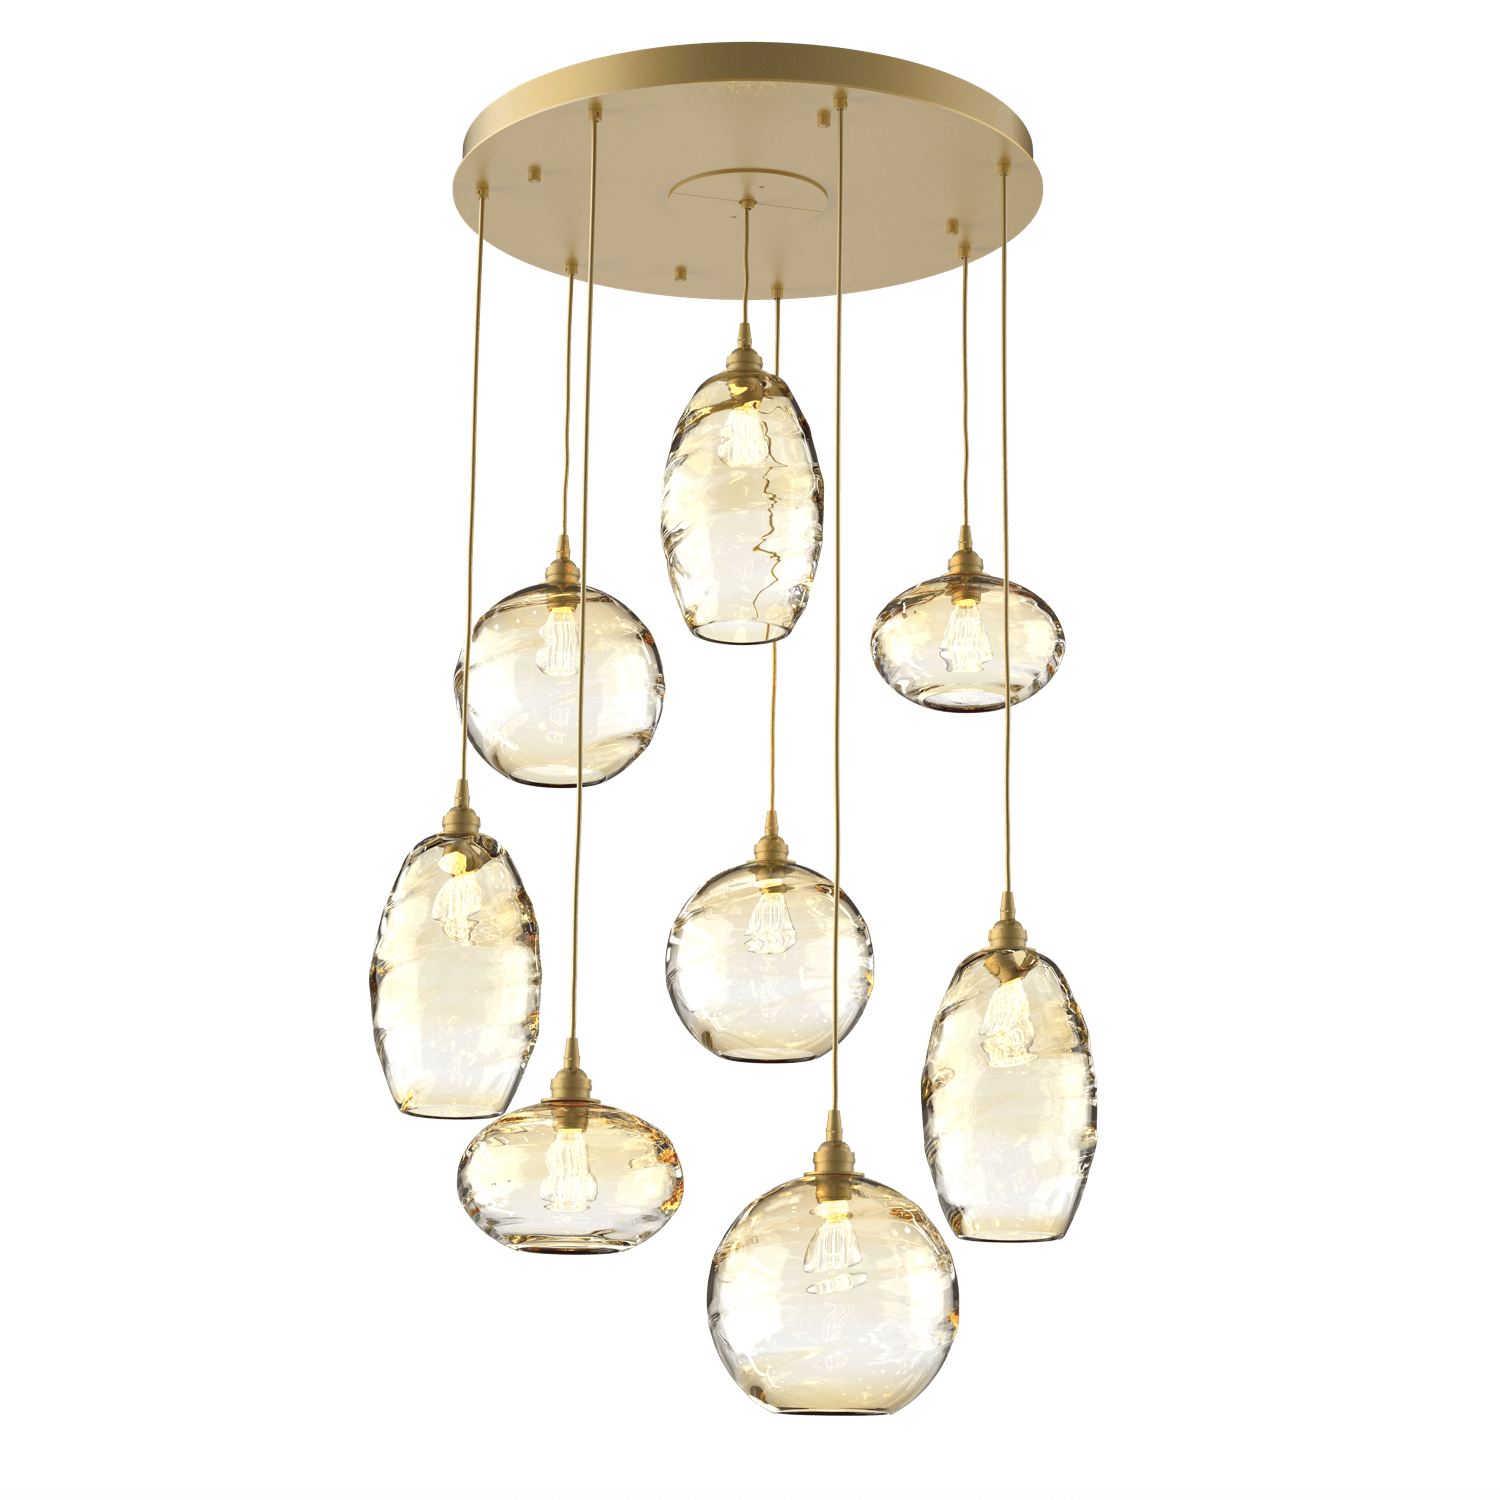 CHB0048-08-GB-OA-Hammerton-Studio-Optic-Blown-Glass-Misto-8-light-round-pendant-chandelier-with-gilded-brass-finish-and-optic-amber-blown-glass-shades-and-incandescent-lamping